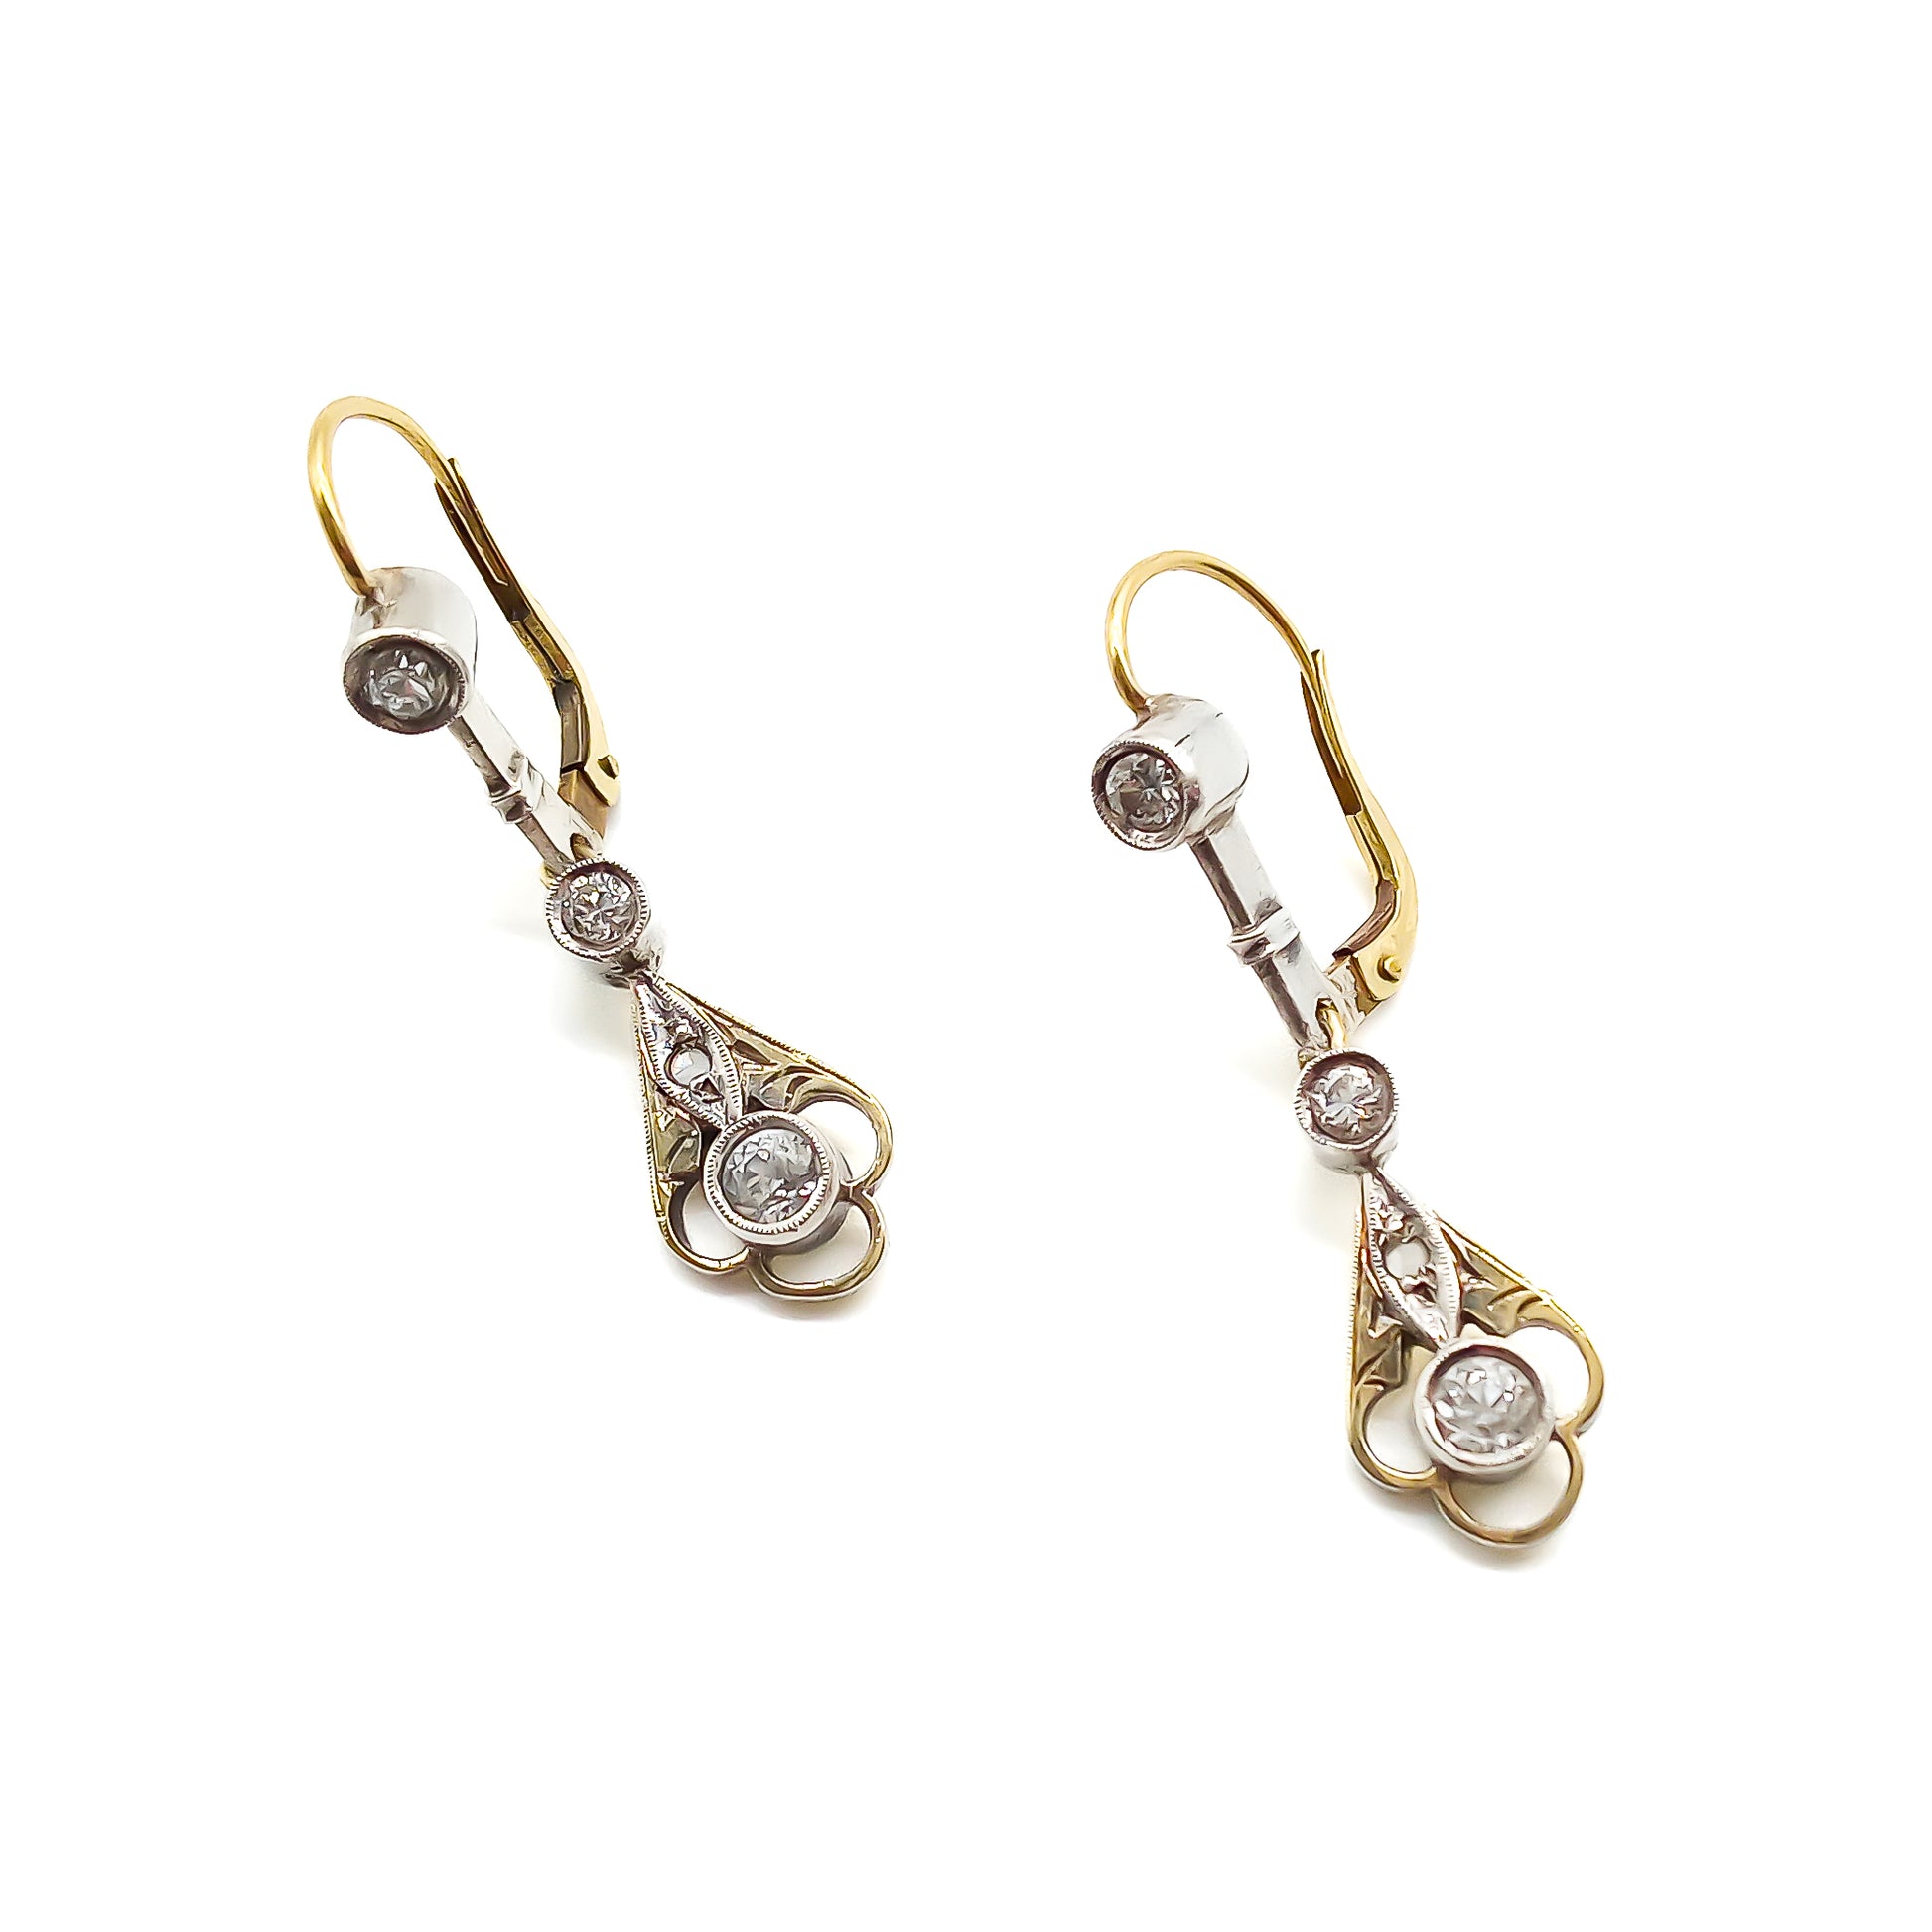 Elegant 14ct white and yellow gold drop earrings, each set with four old-cut diamonds.  Circa 1900’s